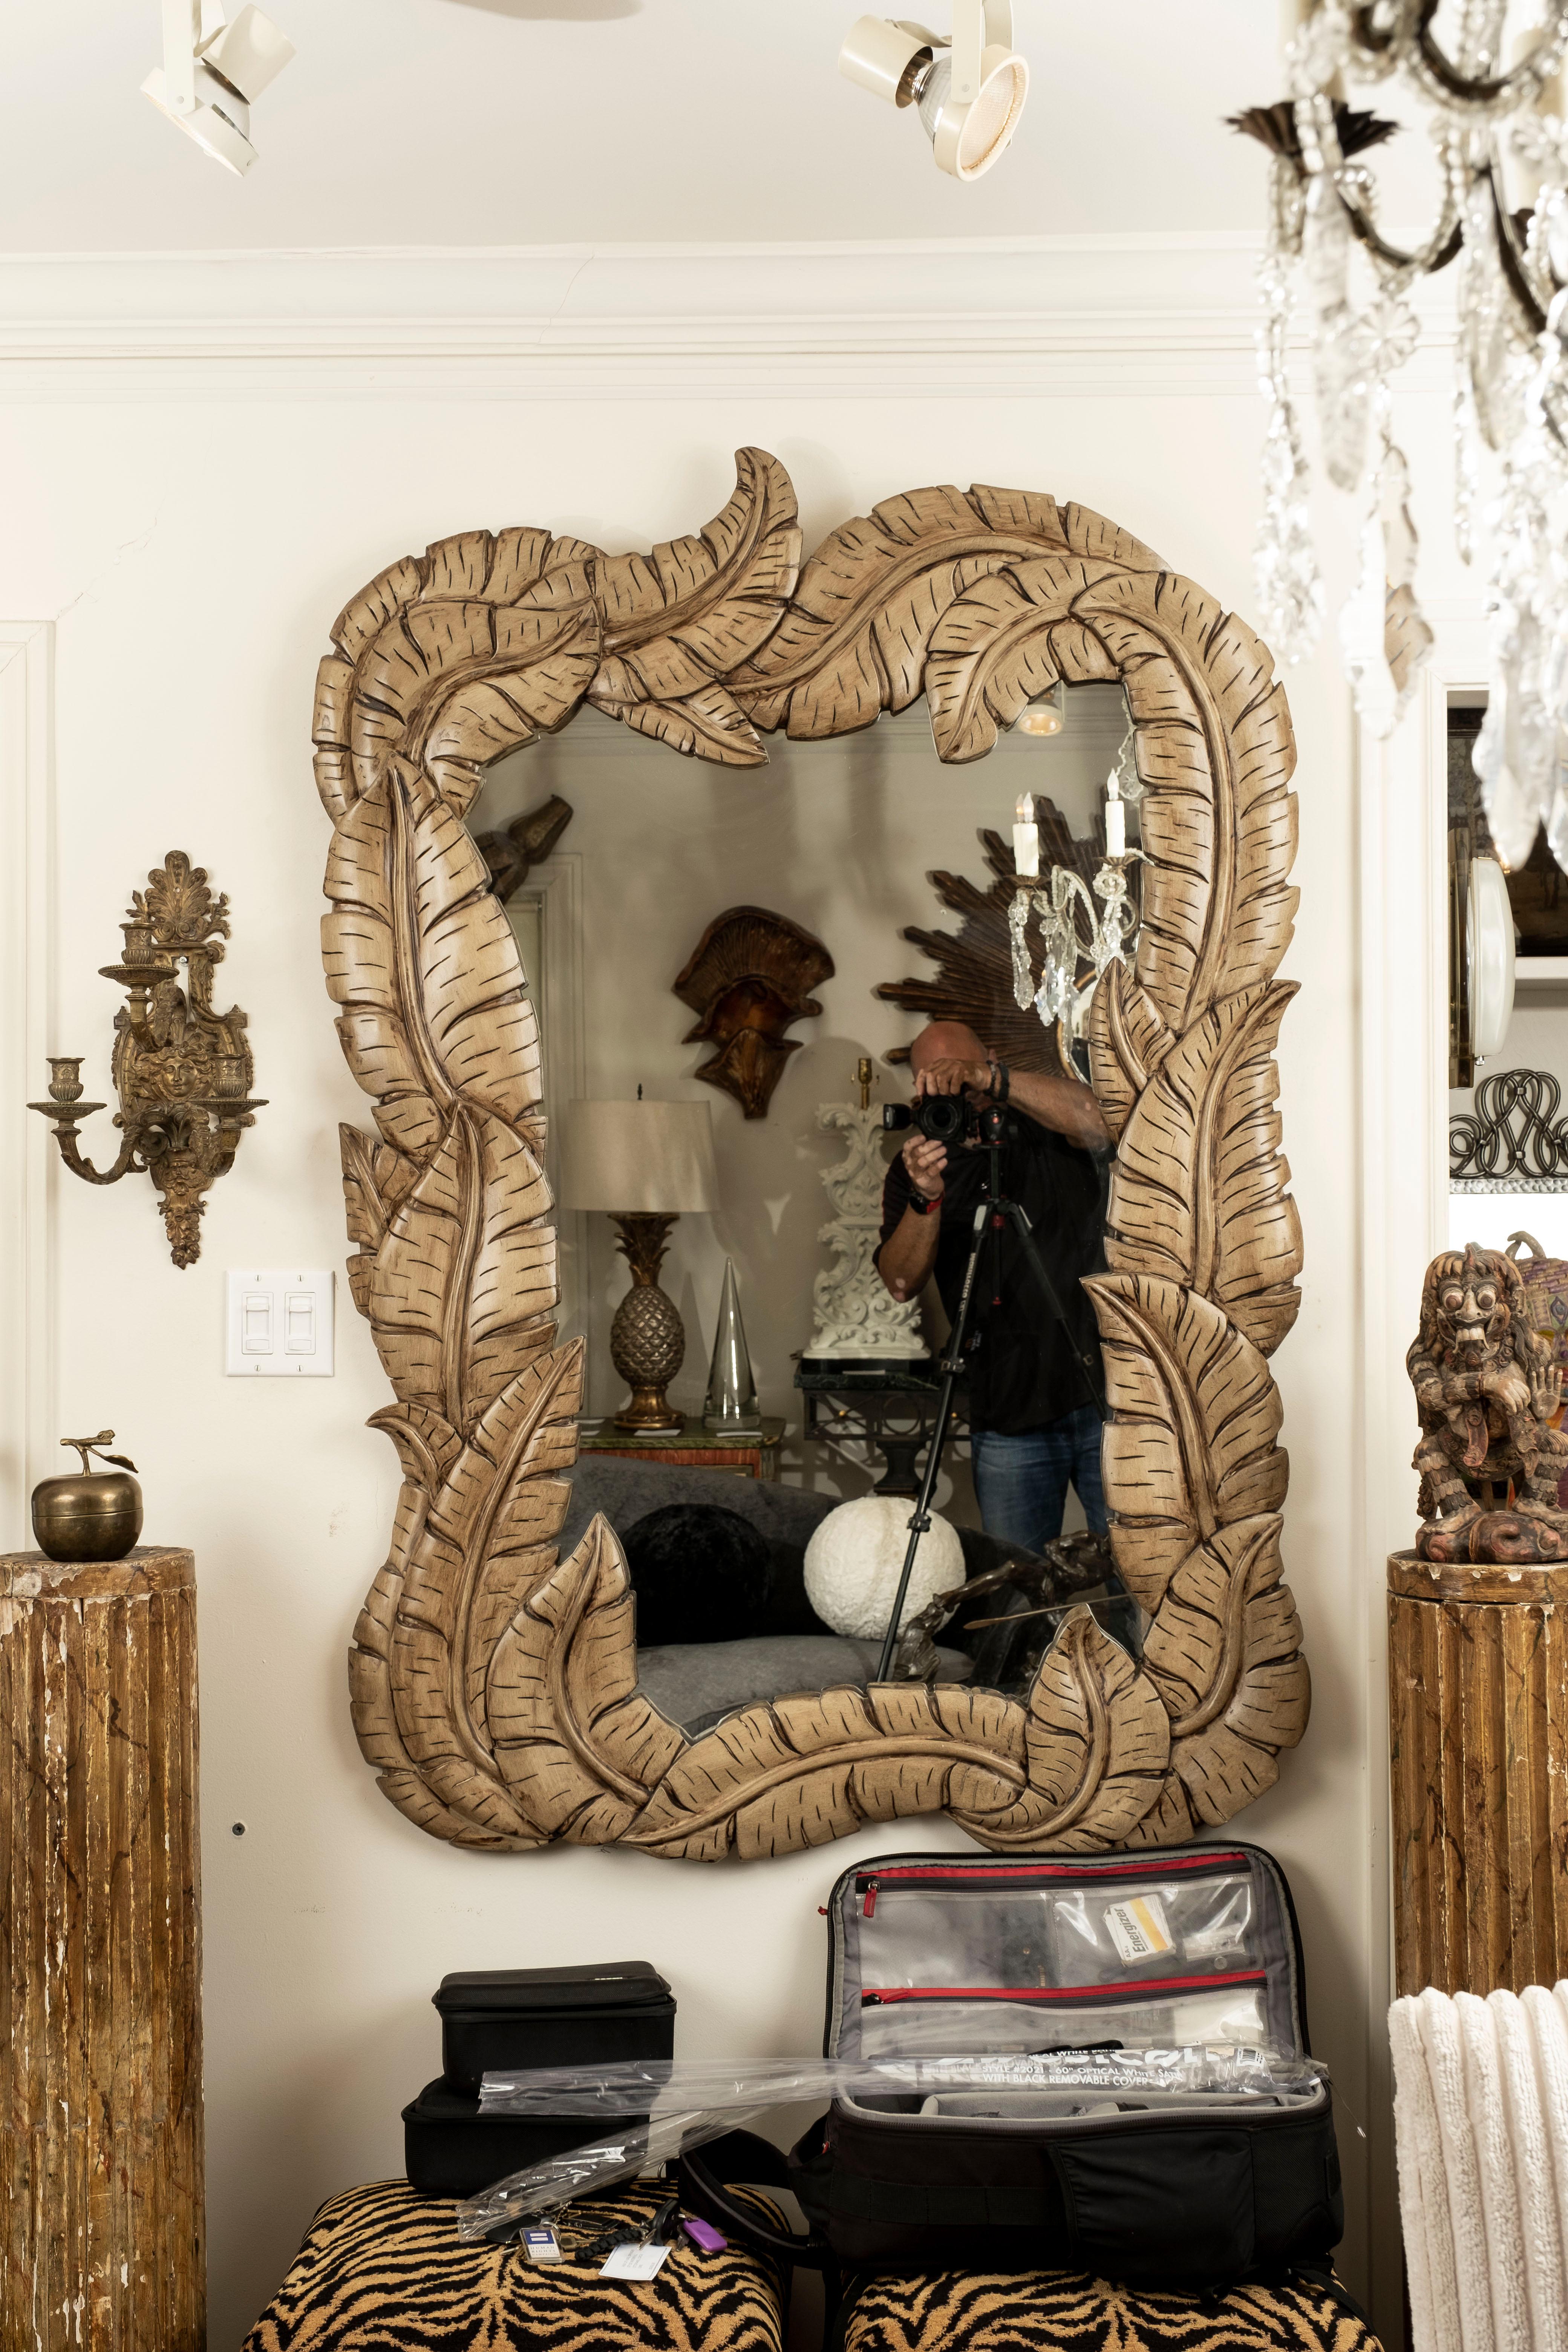 Hollywood Regency Italian Wood Palm Frond Mirror in the Manner of Serge Roche